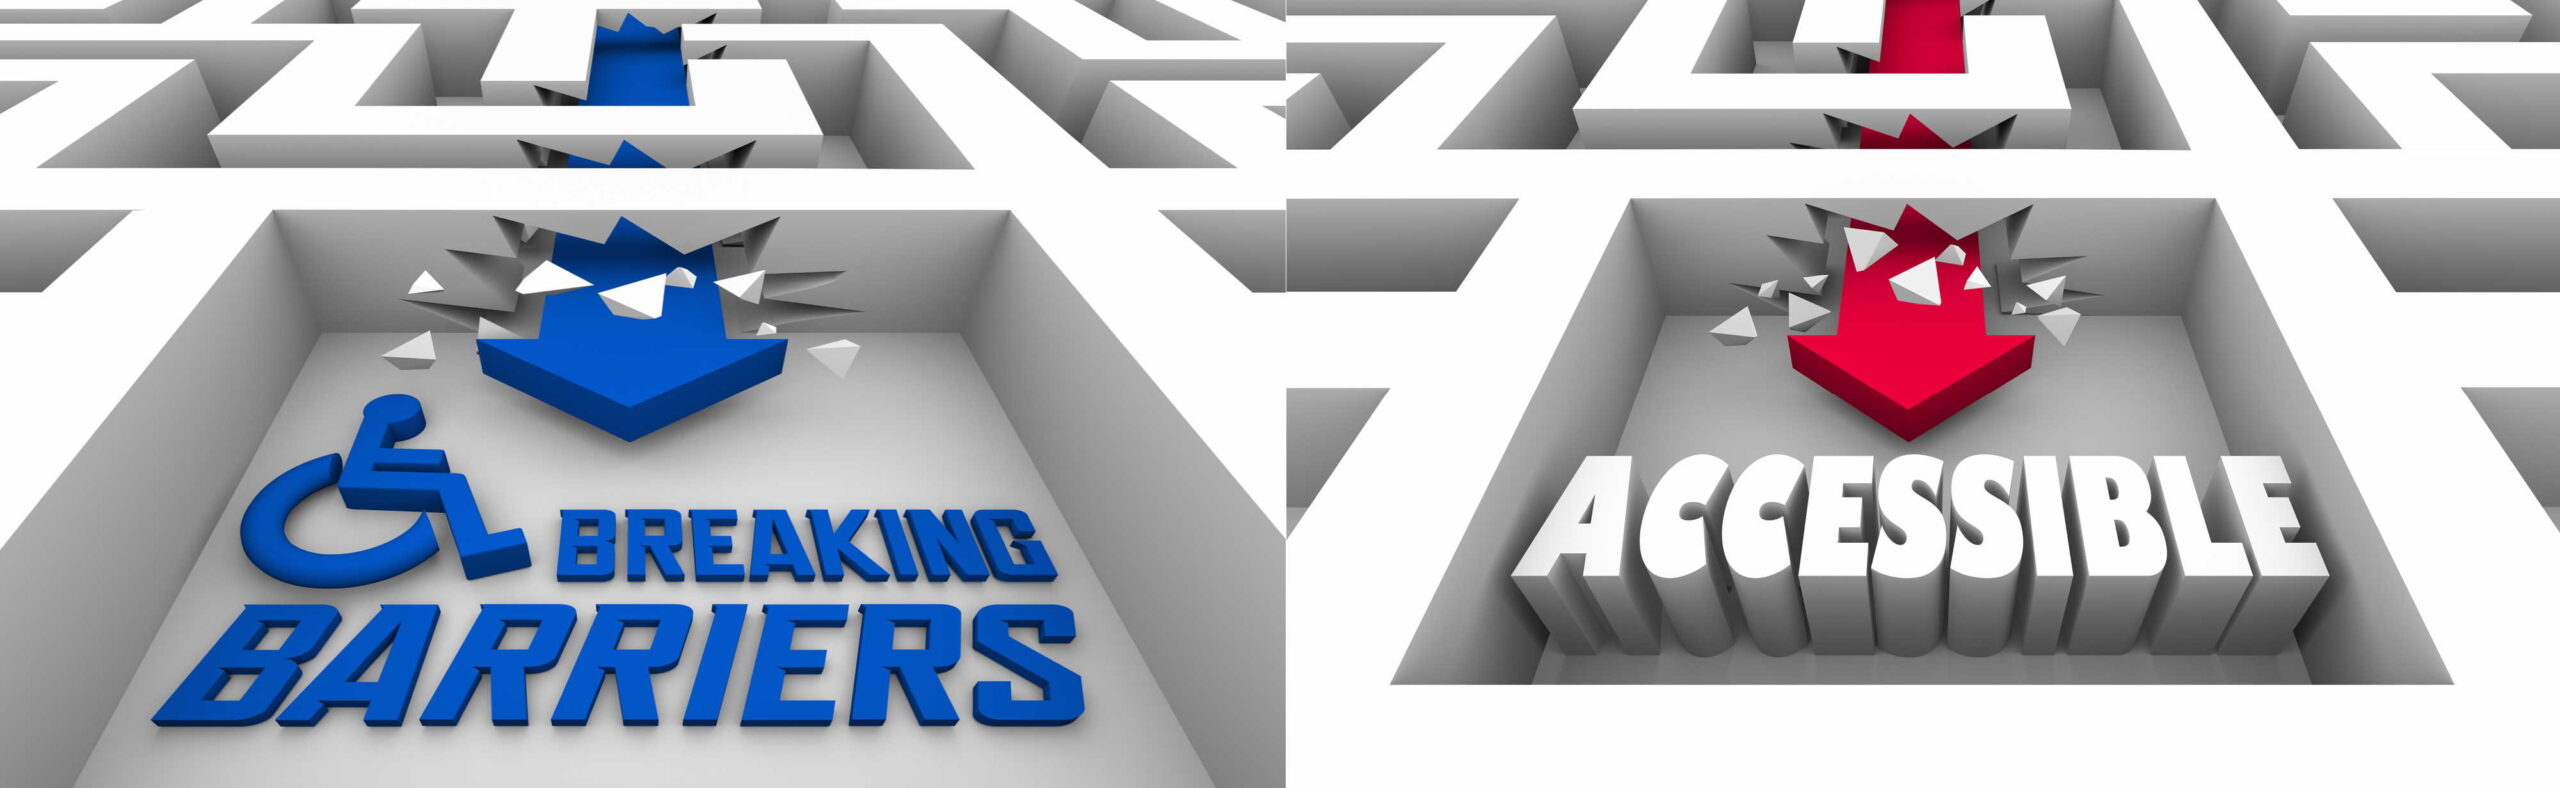 Maze Mashup - Breaking Barriers & Accessible against a maze